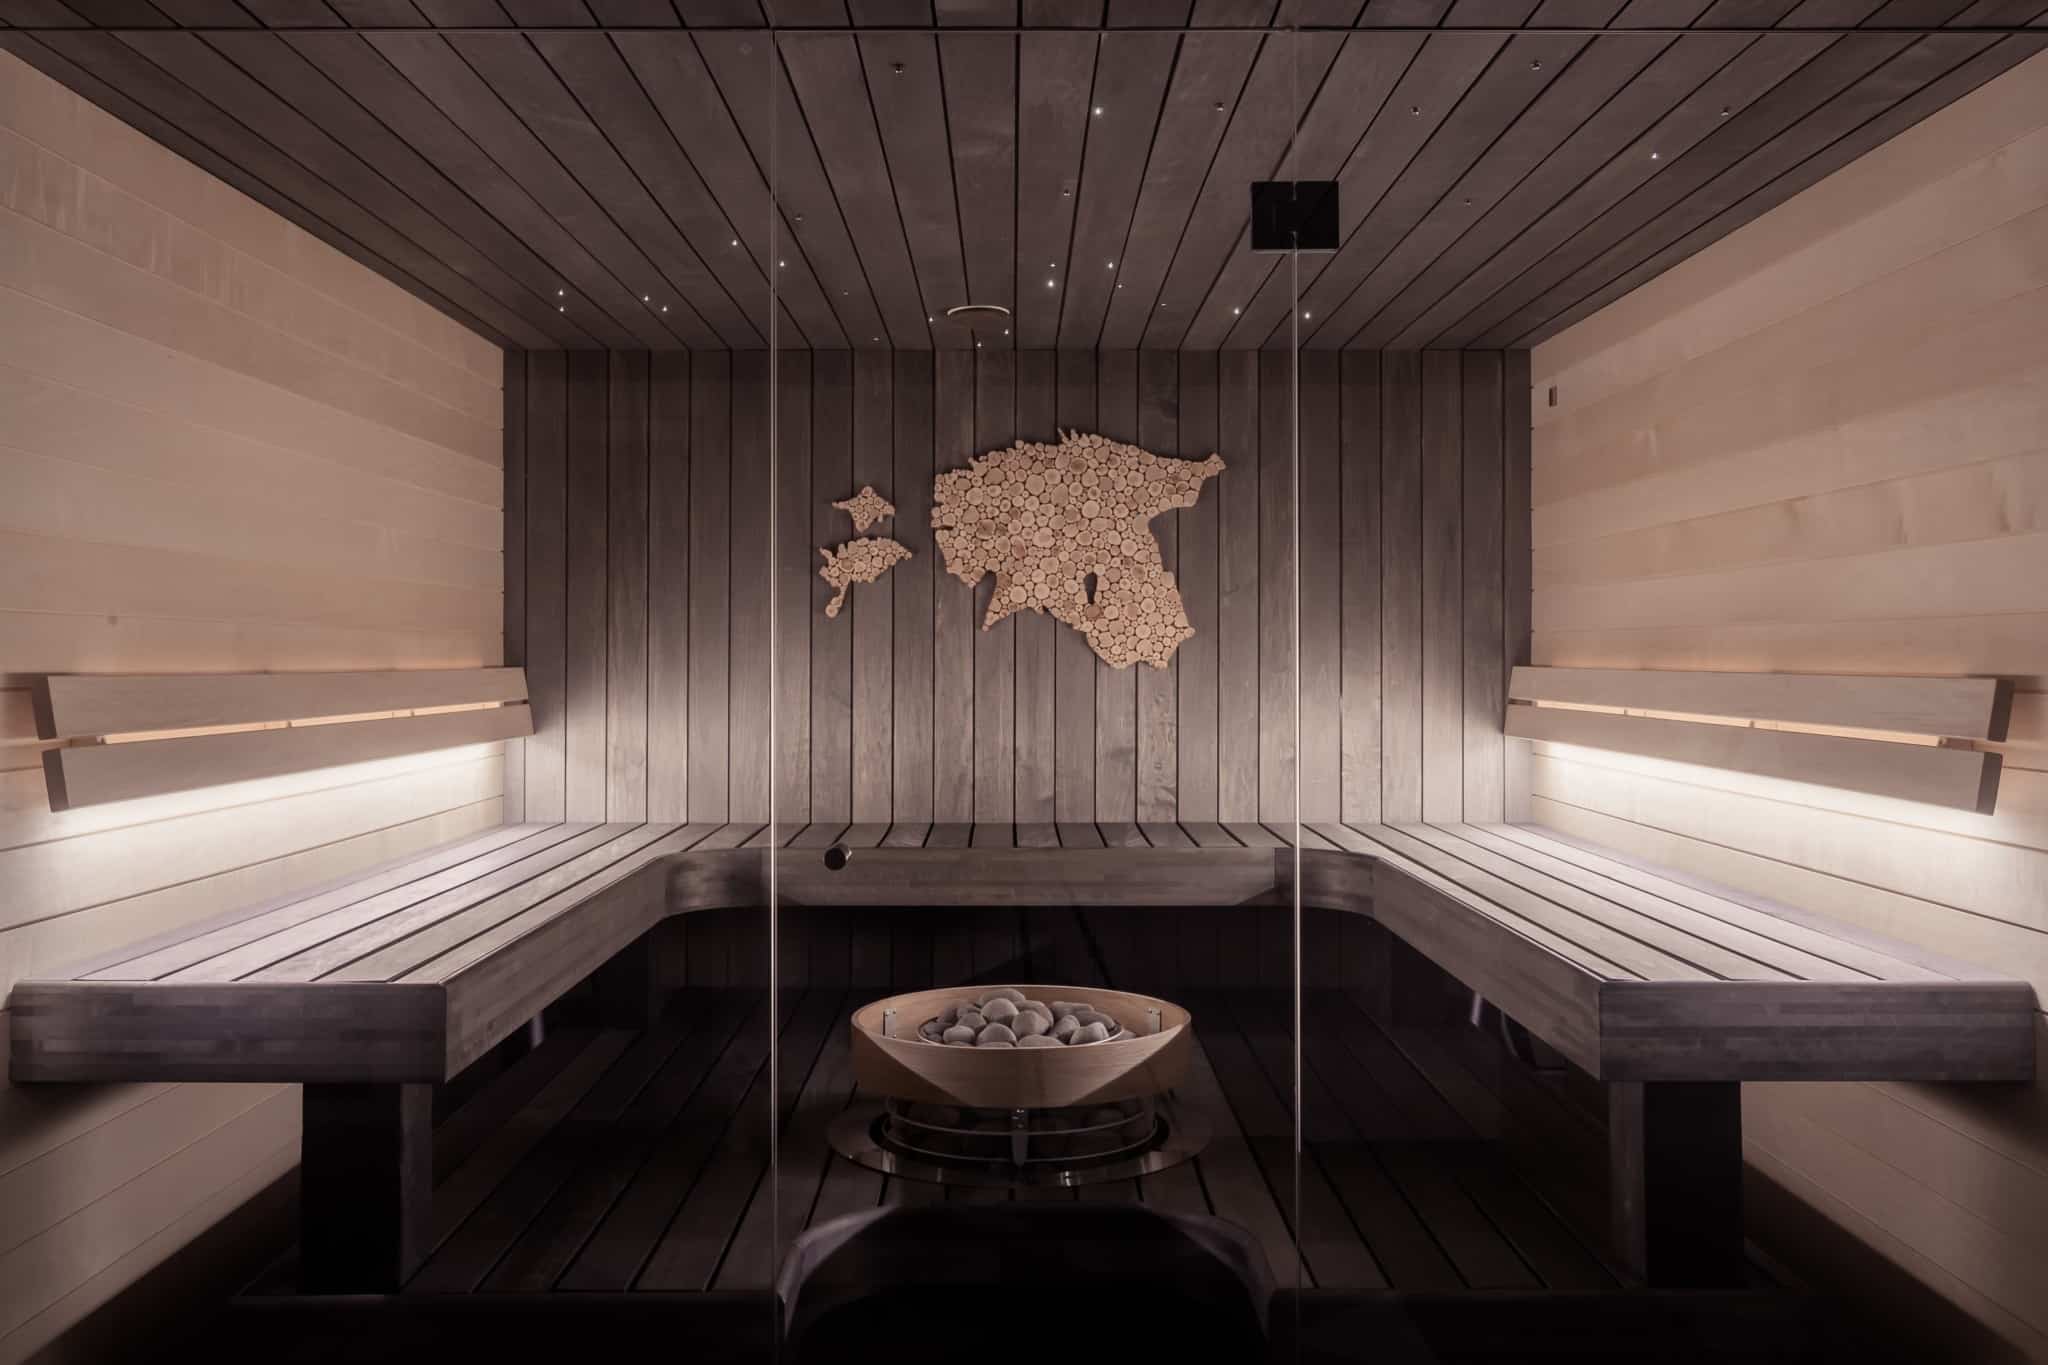 Inside of a wooden sauna with a world map on the wall